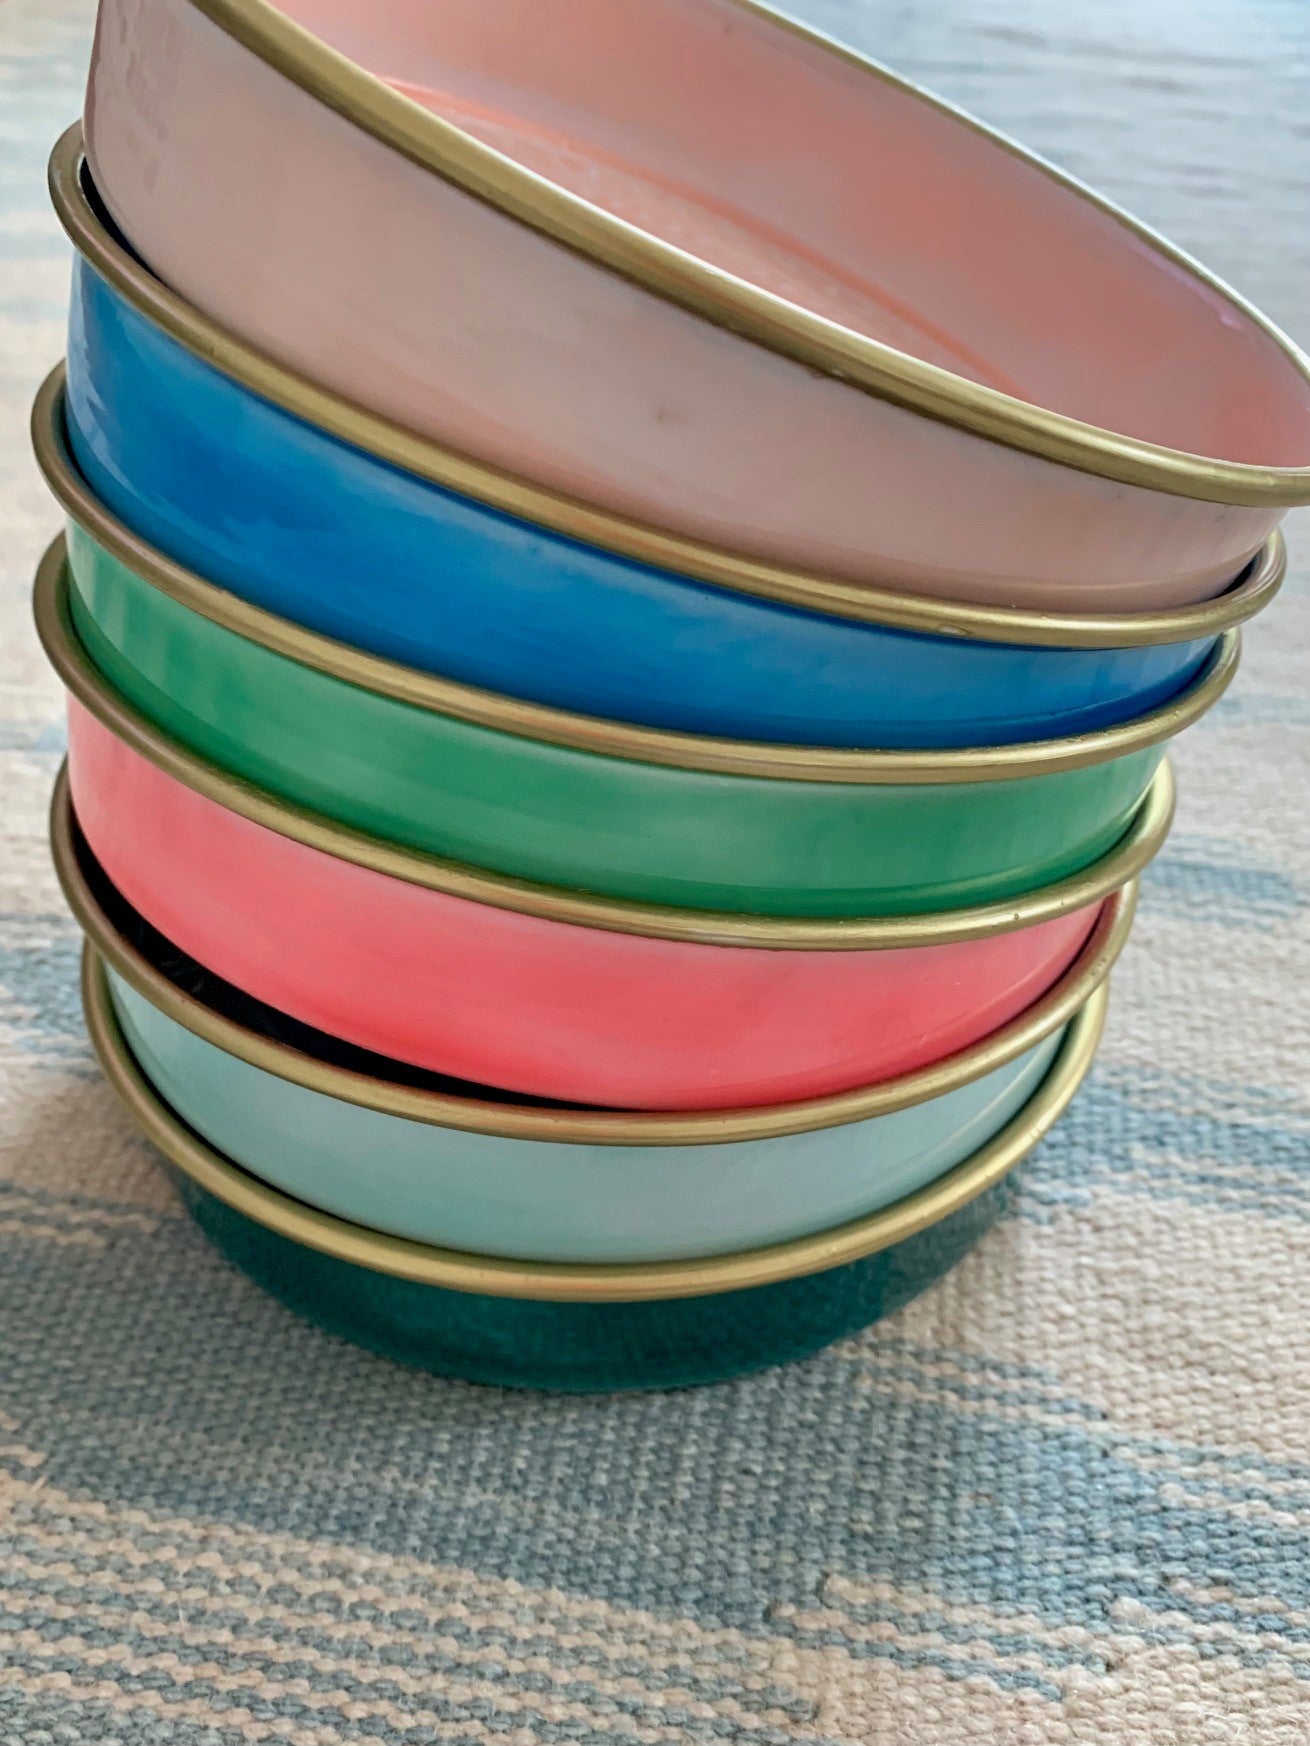 A collection of mini colourful enamel trays all stacked up together.